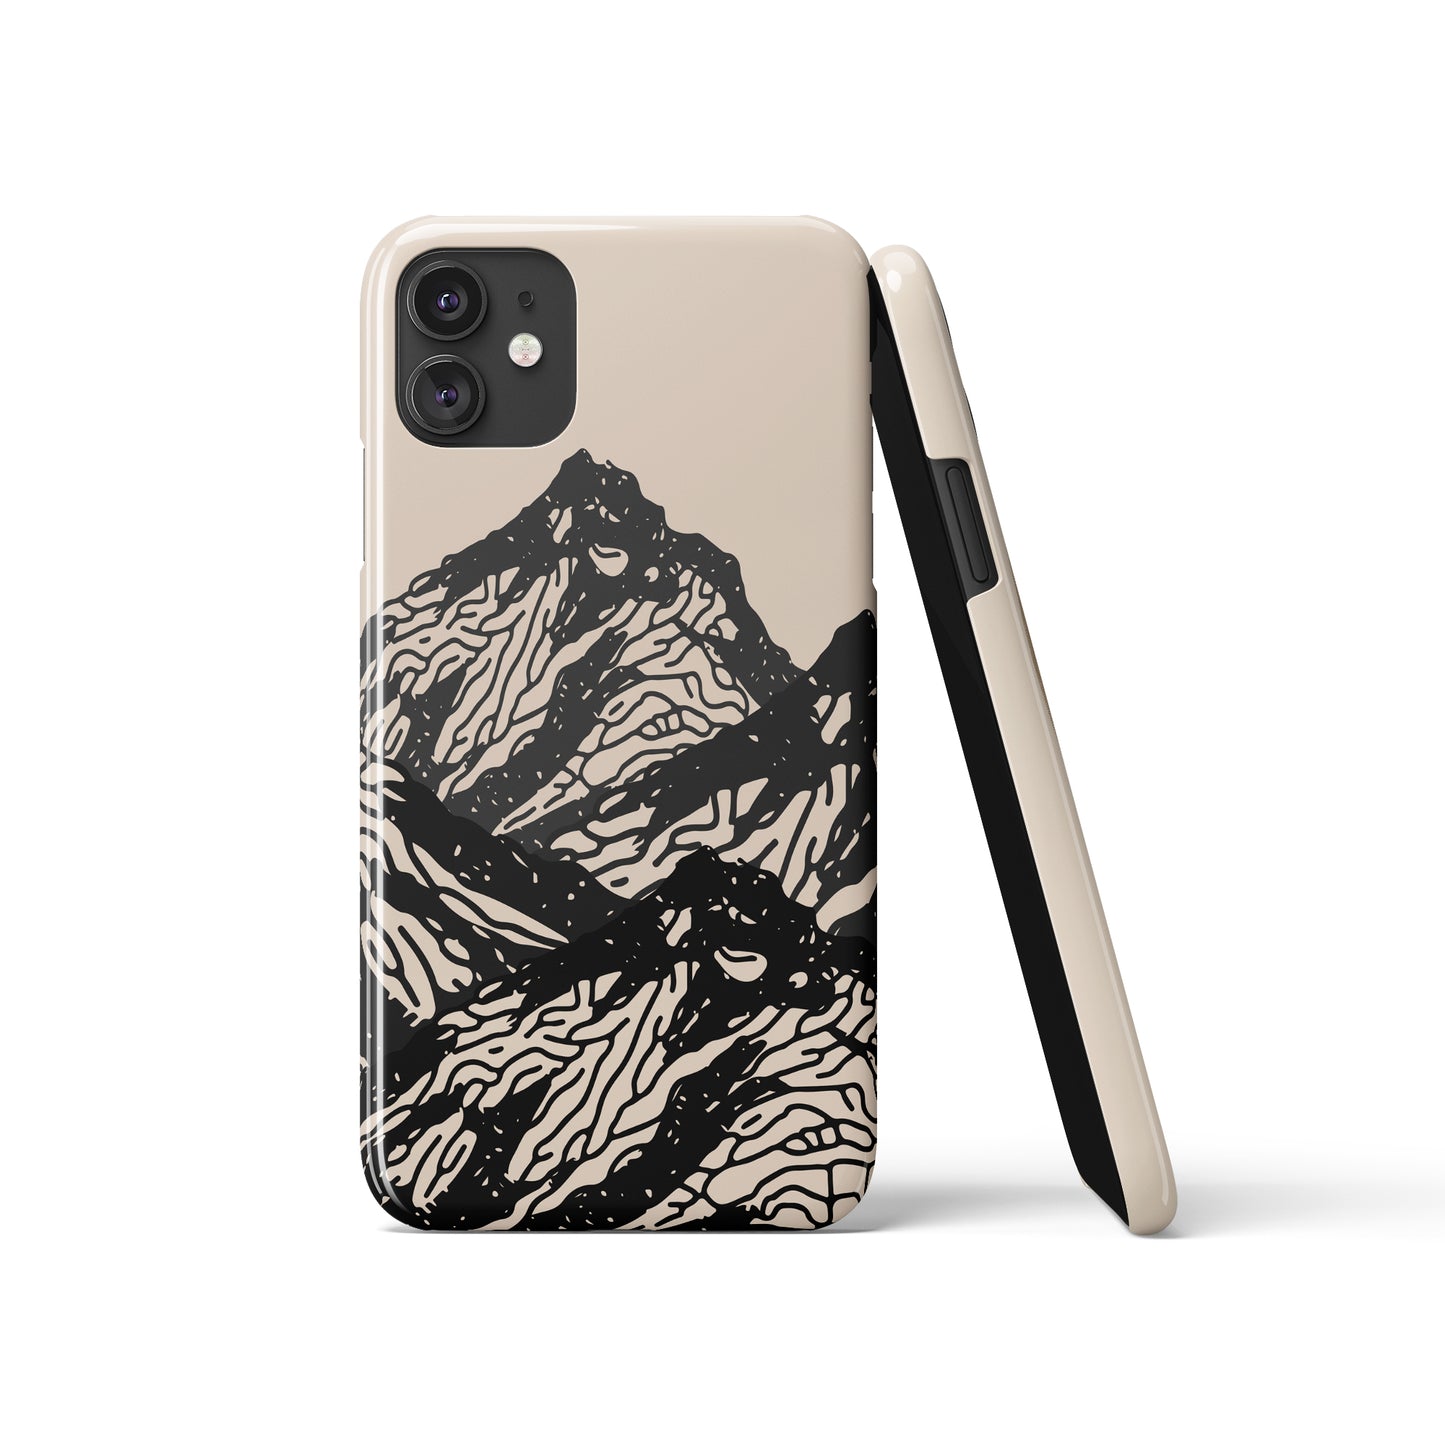 Yellowstone National Park iPhone Case